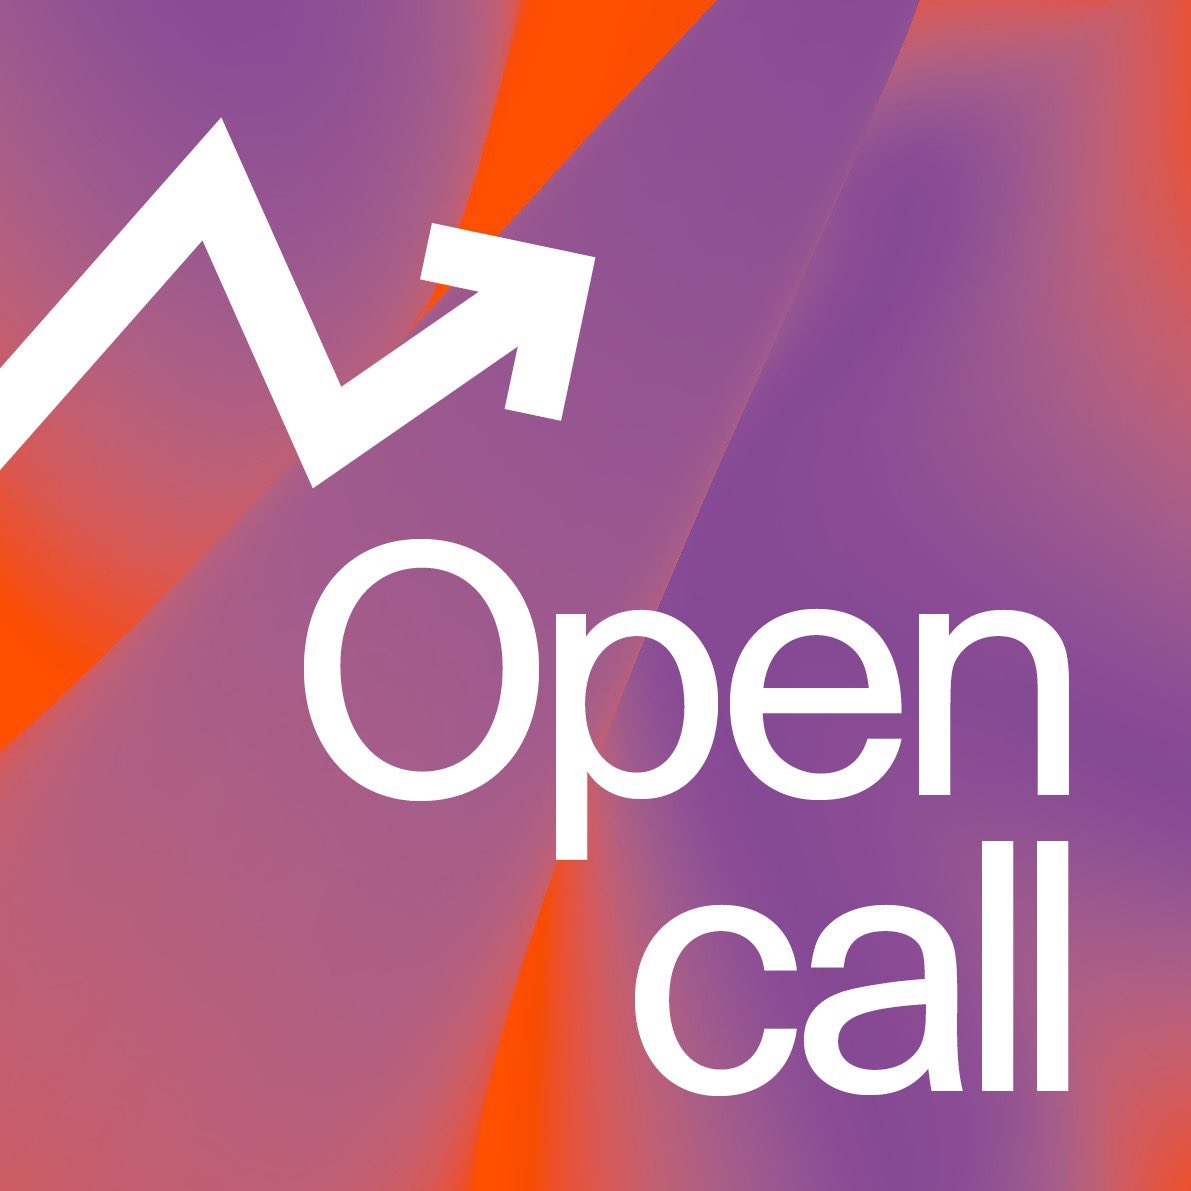 🔥OPEN CALL!💥 The Open Call for the Architecture Fringe Festival 2023 Open Programme is now live! 🎉 Open-access and free to use, the Open Programme platform is for self-directed work, projects, and events. Take a look 👀 👉 architecturefringe.com #archifringe #af2023